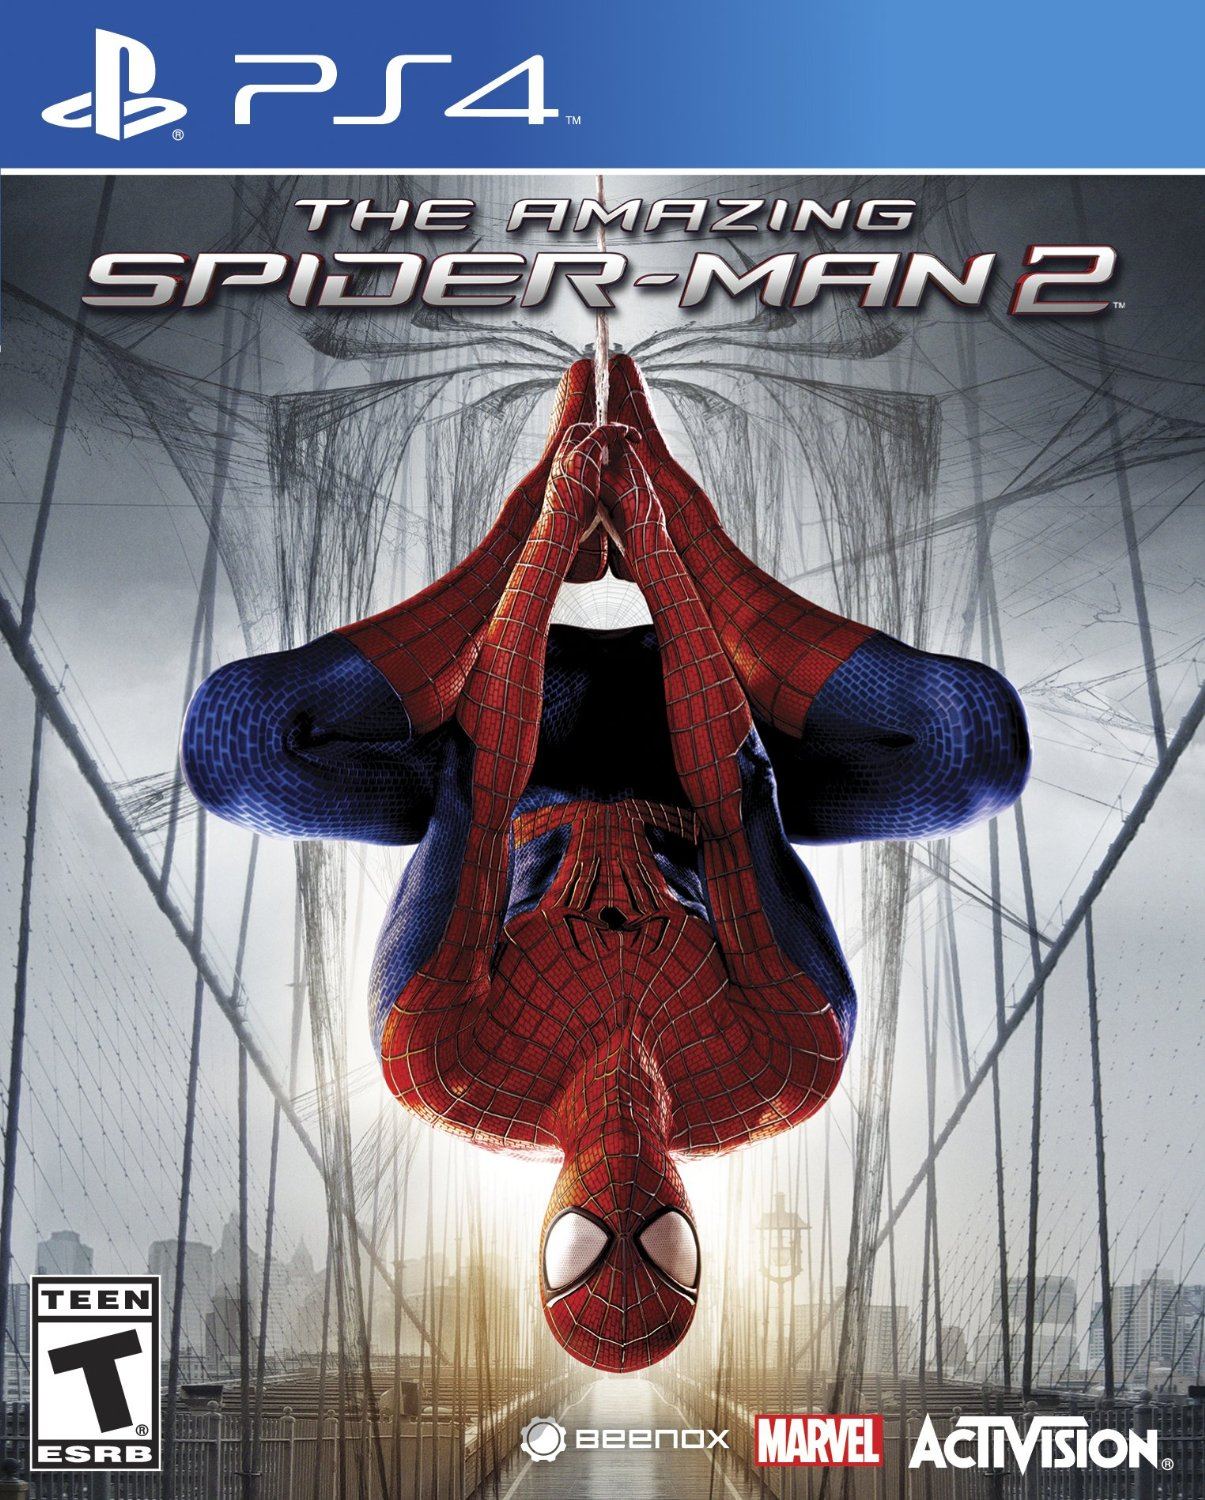 The Amazing Spider-Man 2 for PlayStation 4